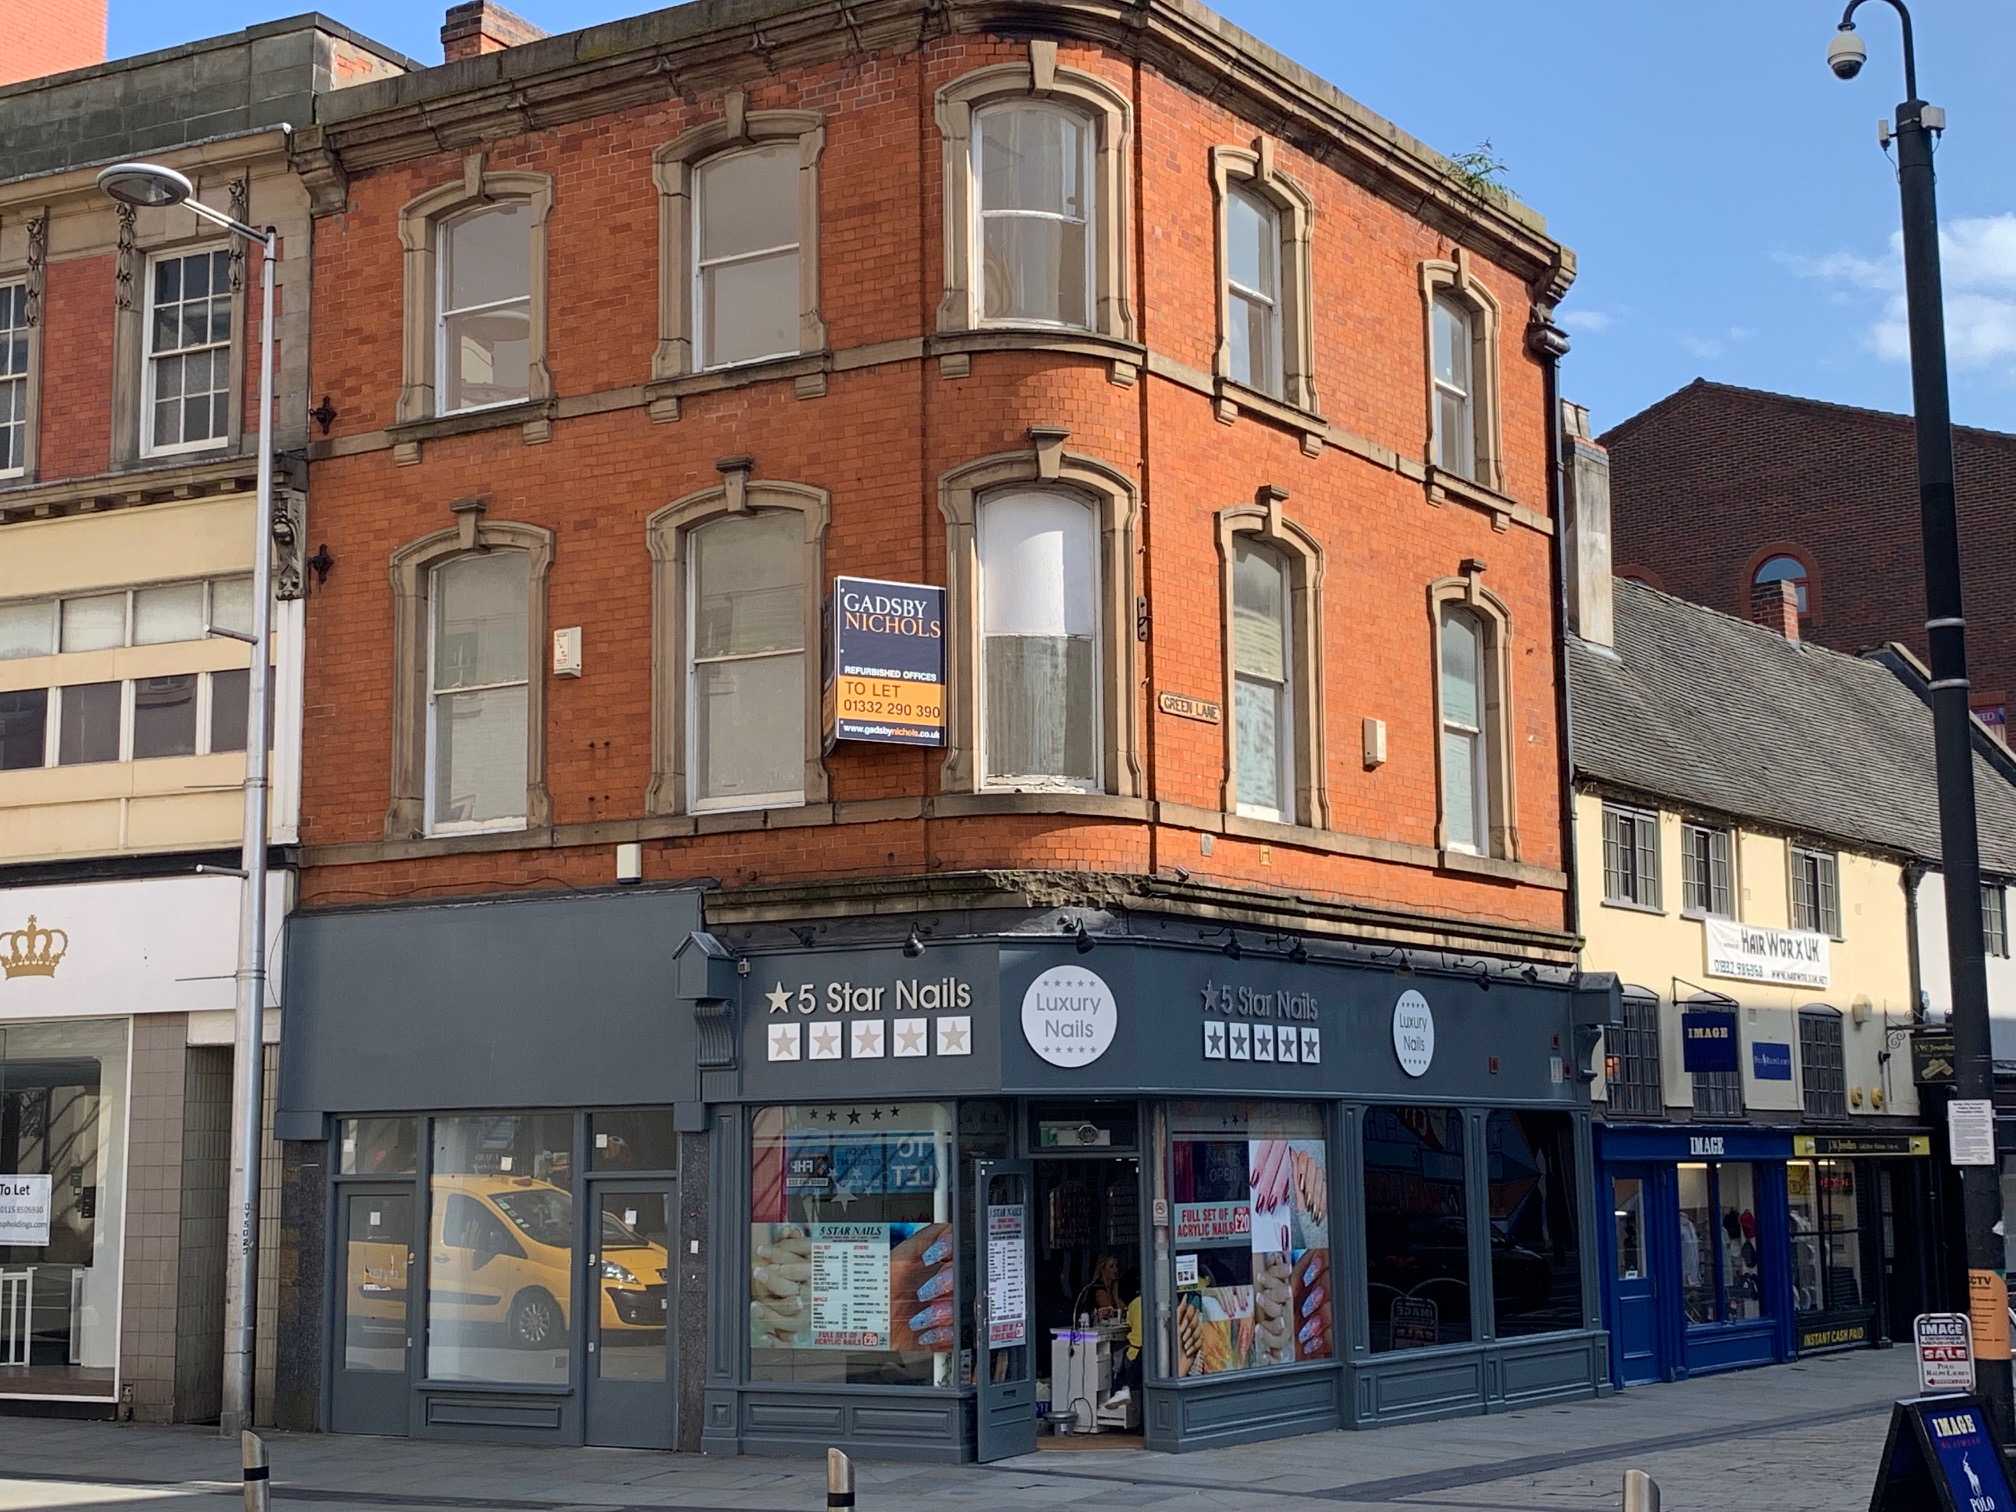 Mixed Use for rent in Derby. From Gadsby Nichols - Derby